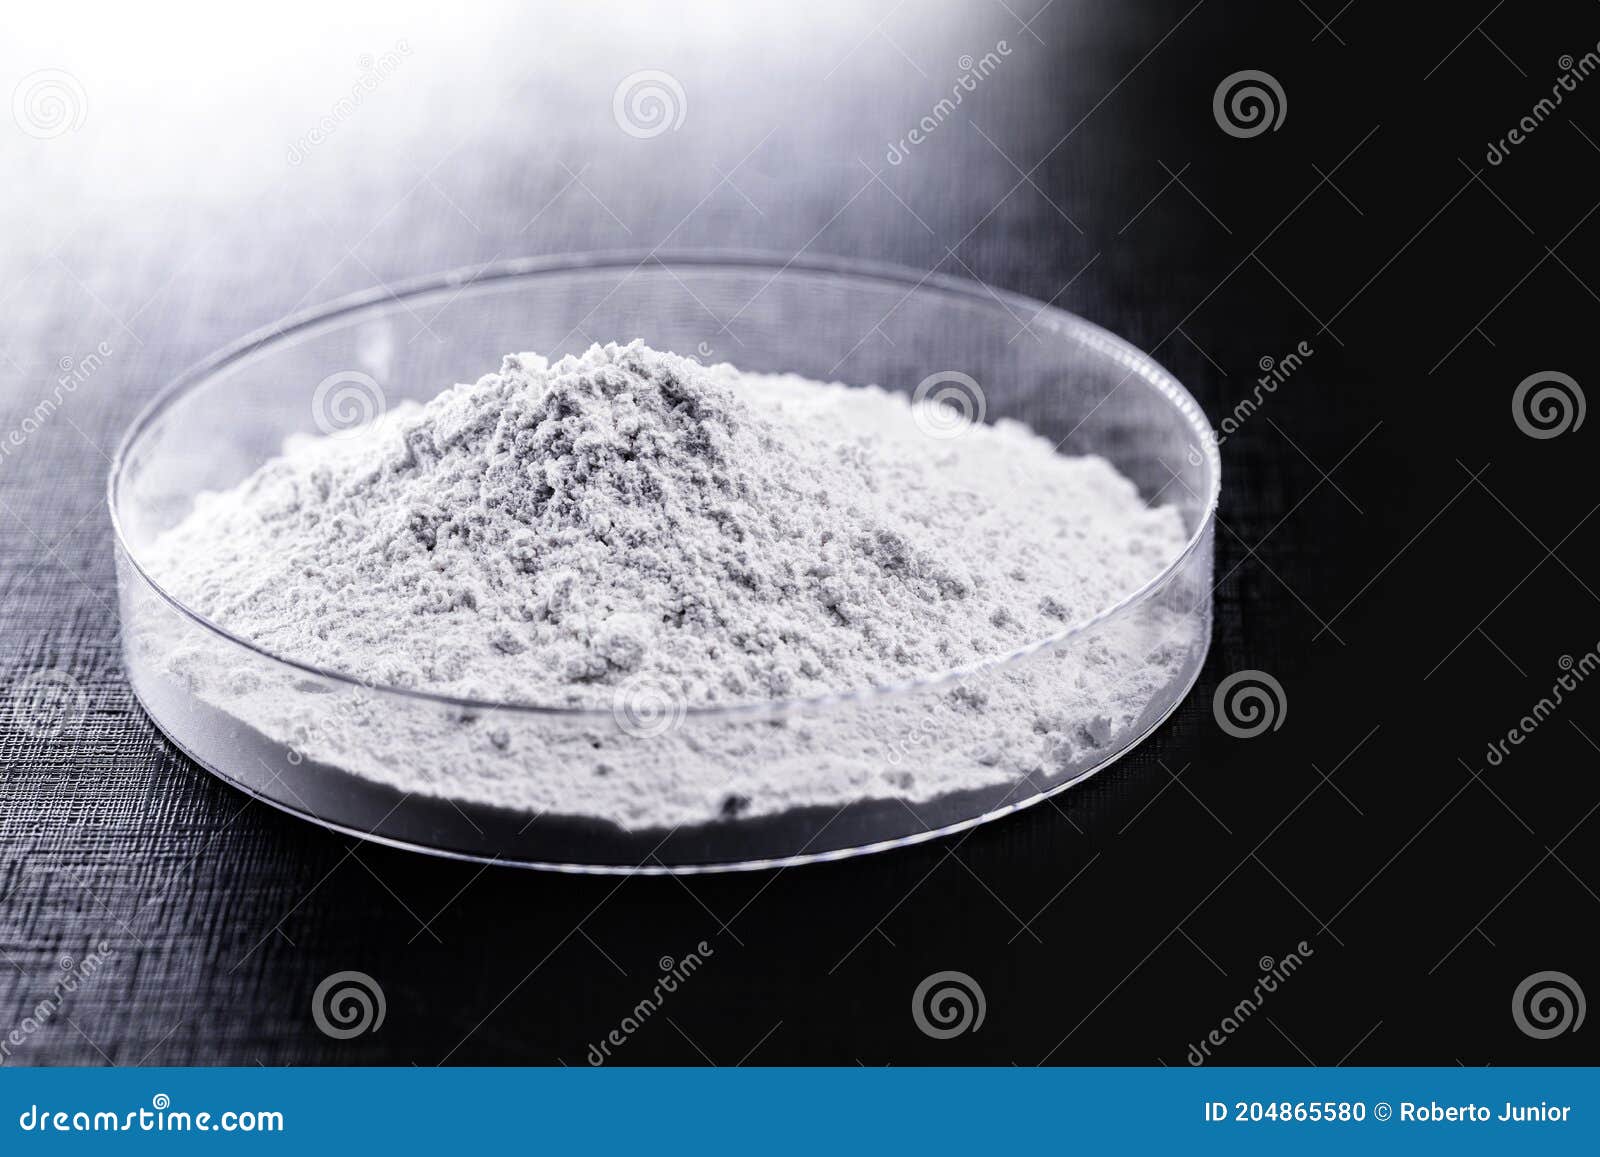 calcium carbonate  the result of the reaction of calcium oxide with carbon dioxide. being prepared in petri dish